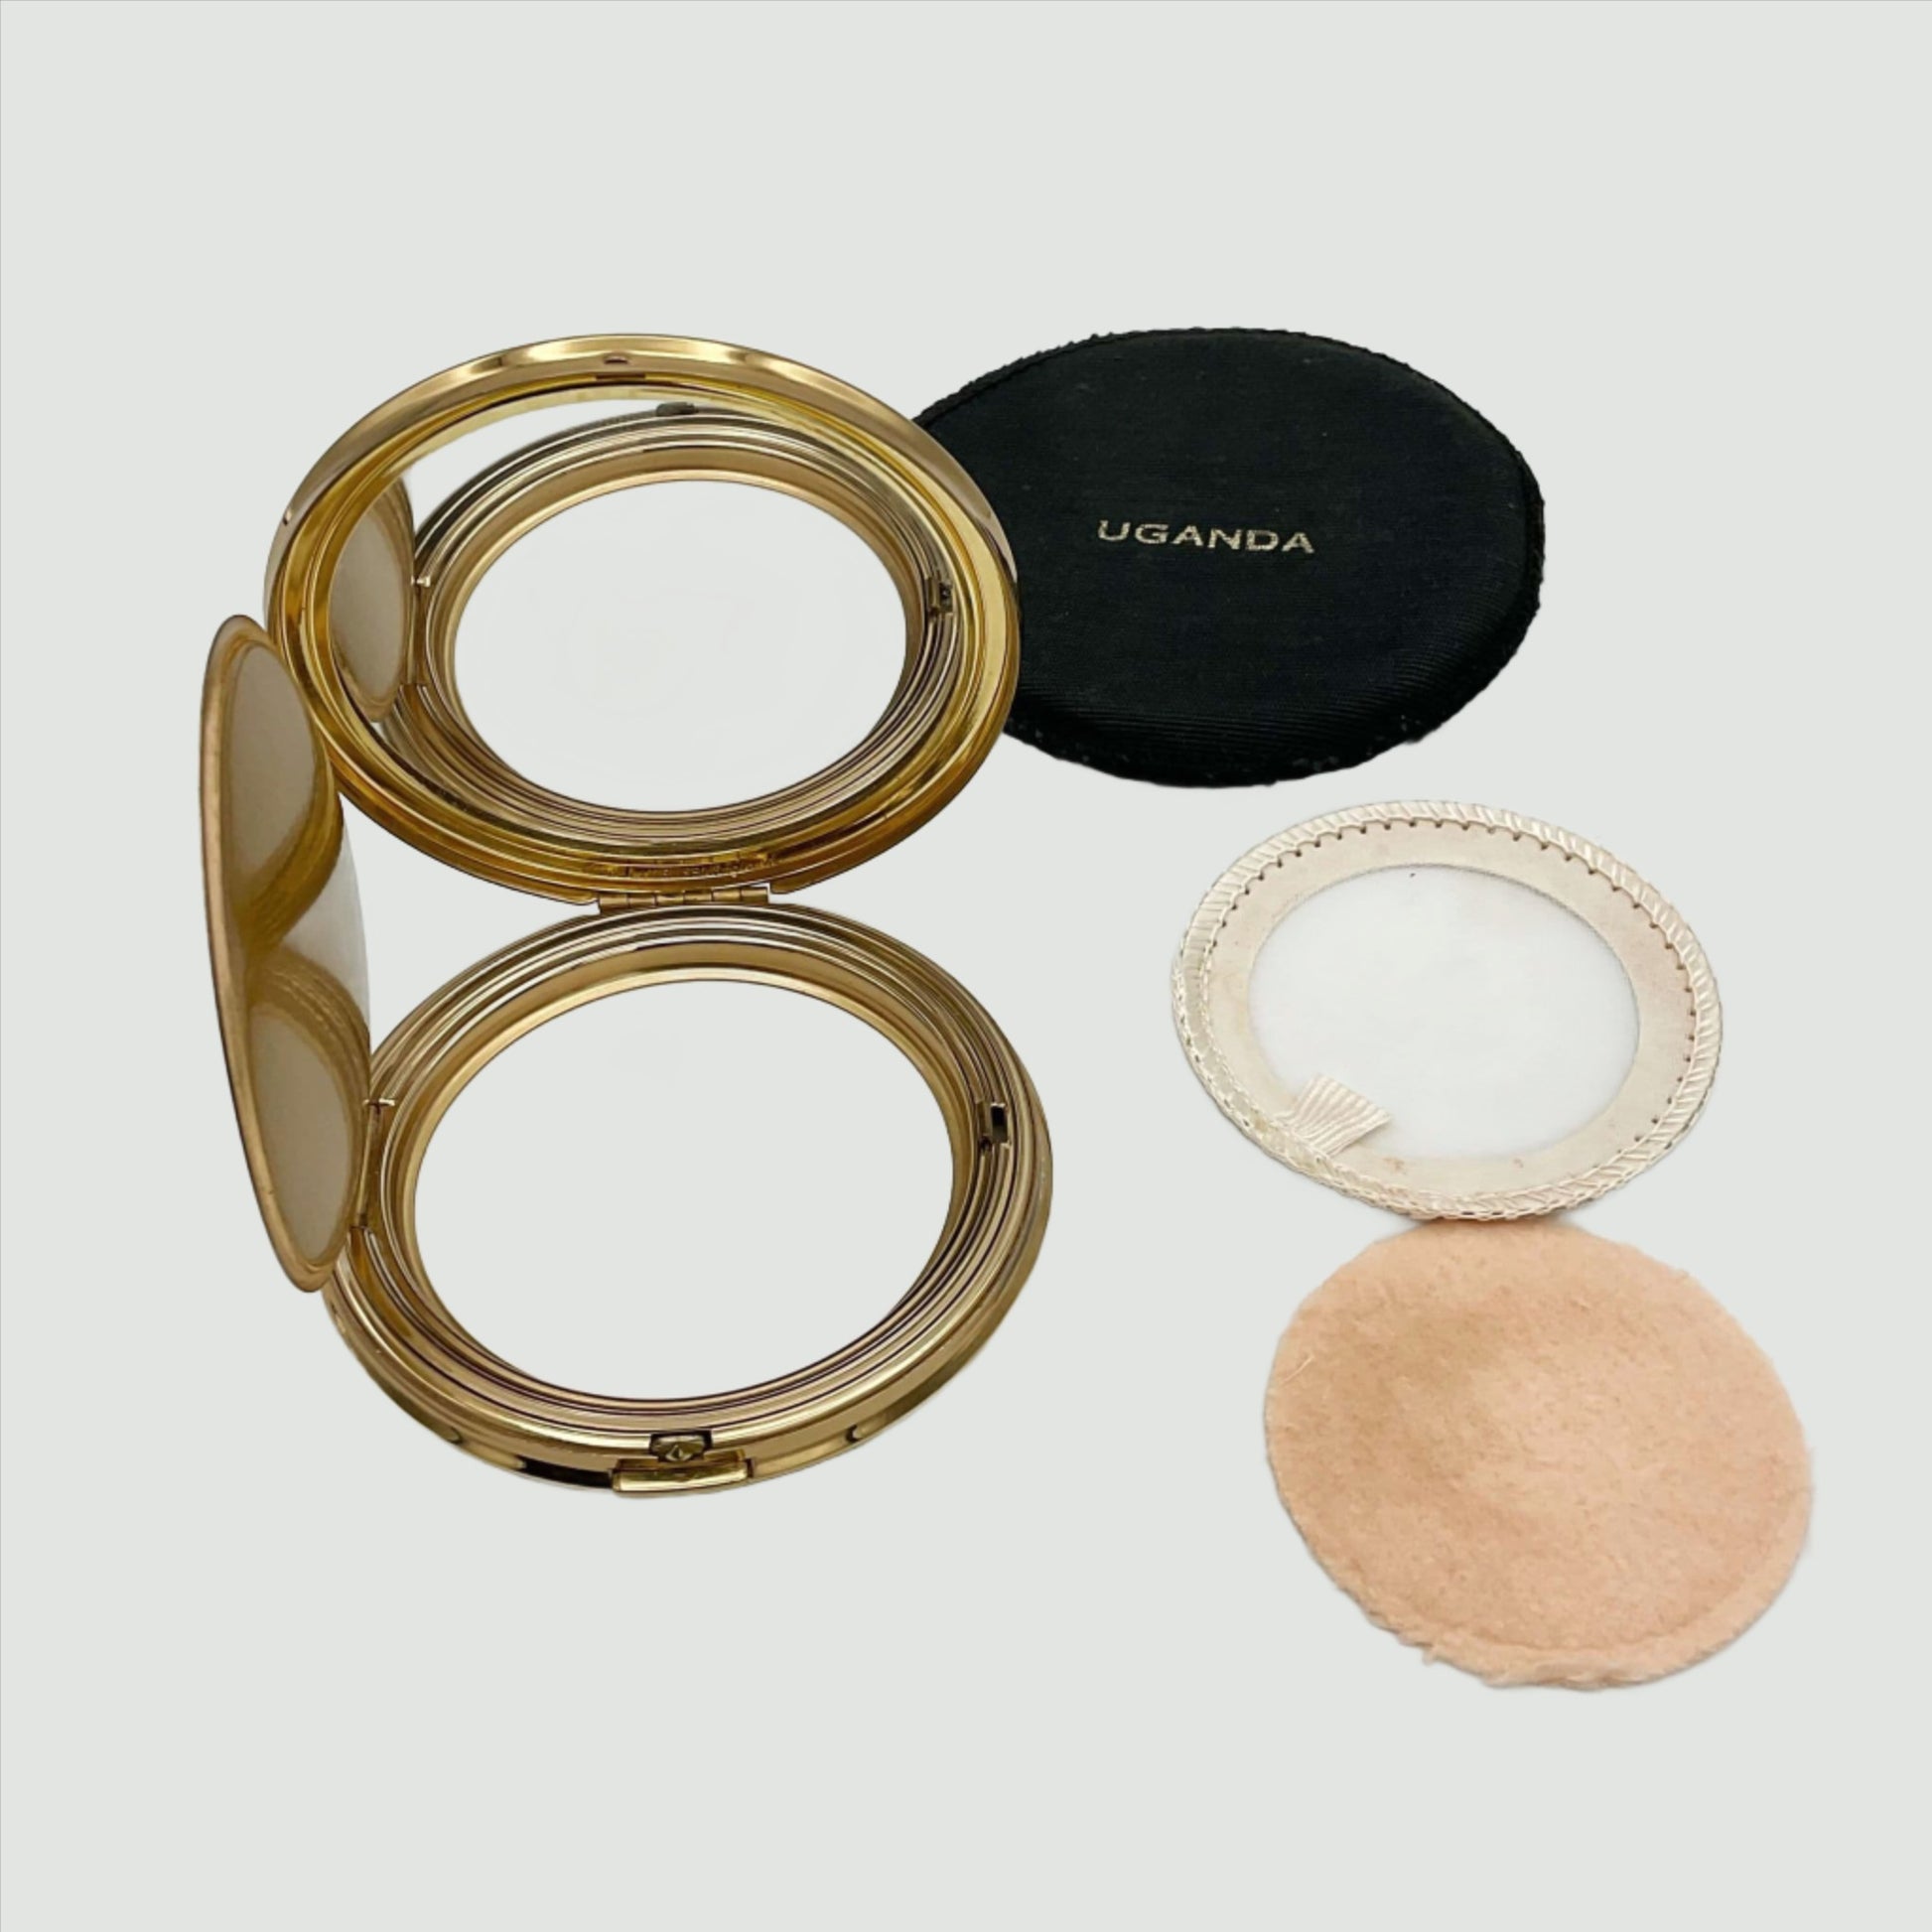 open powder compact case showing a clear mirror, a powder applicator, powder screen and black case